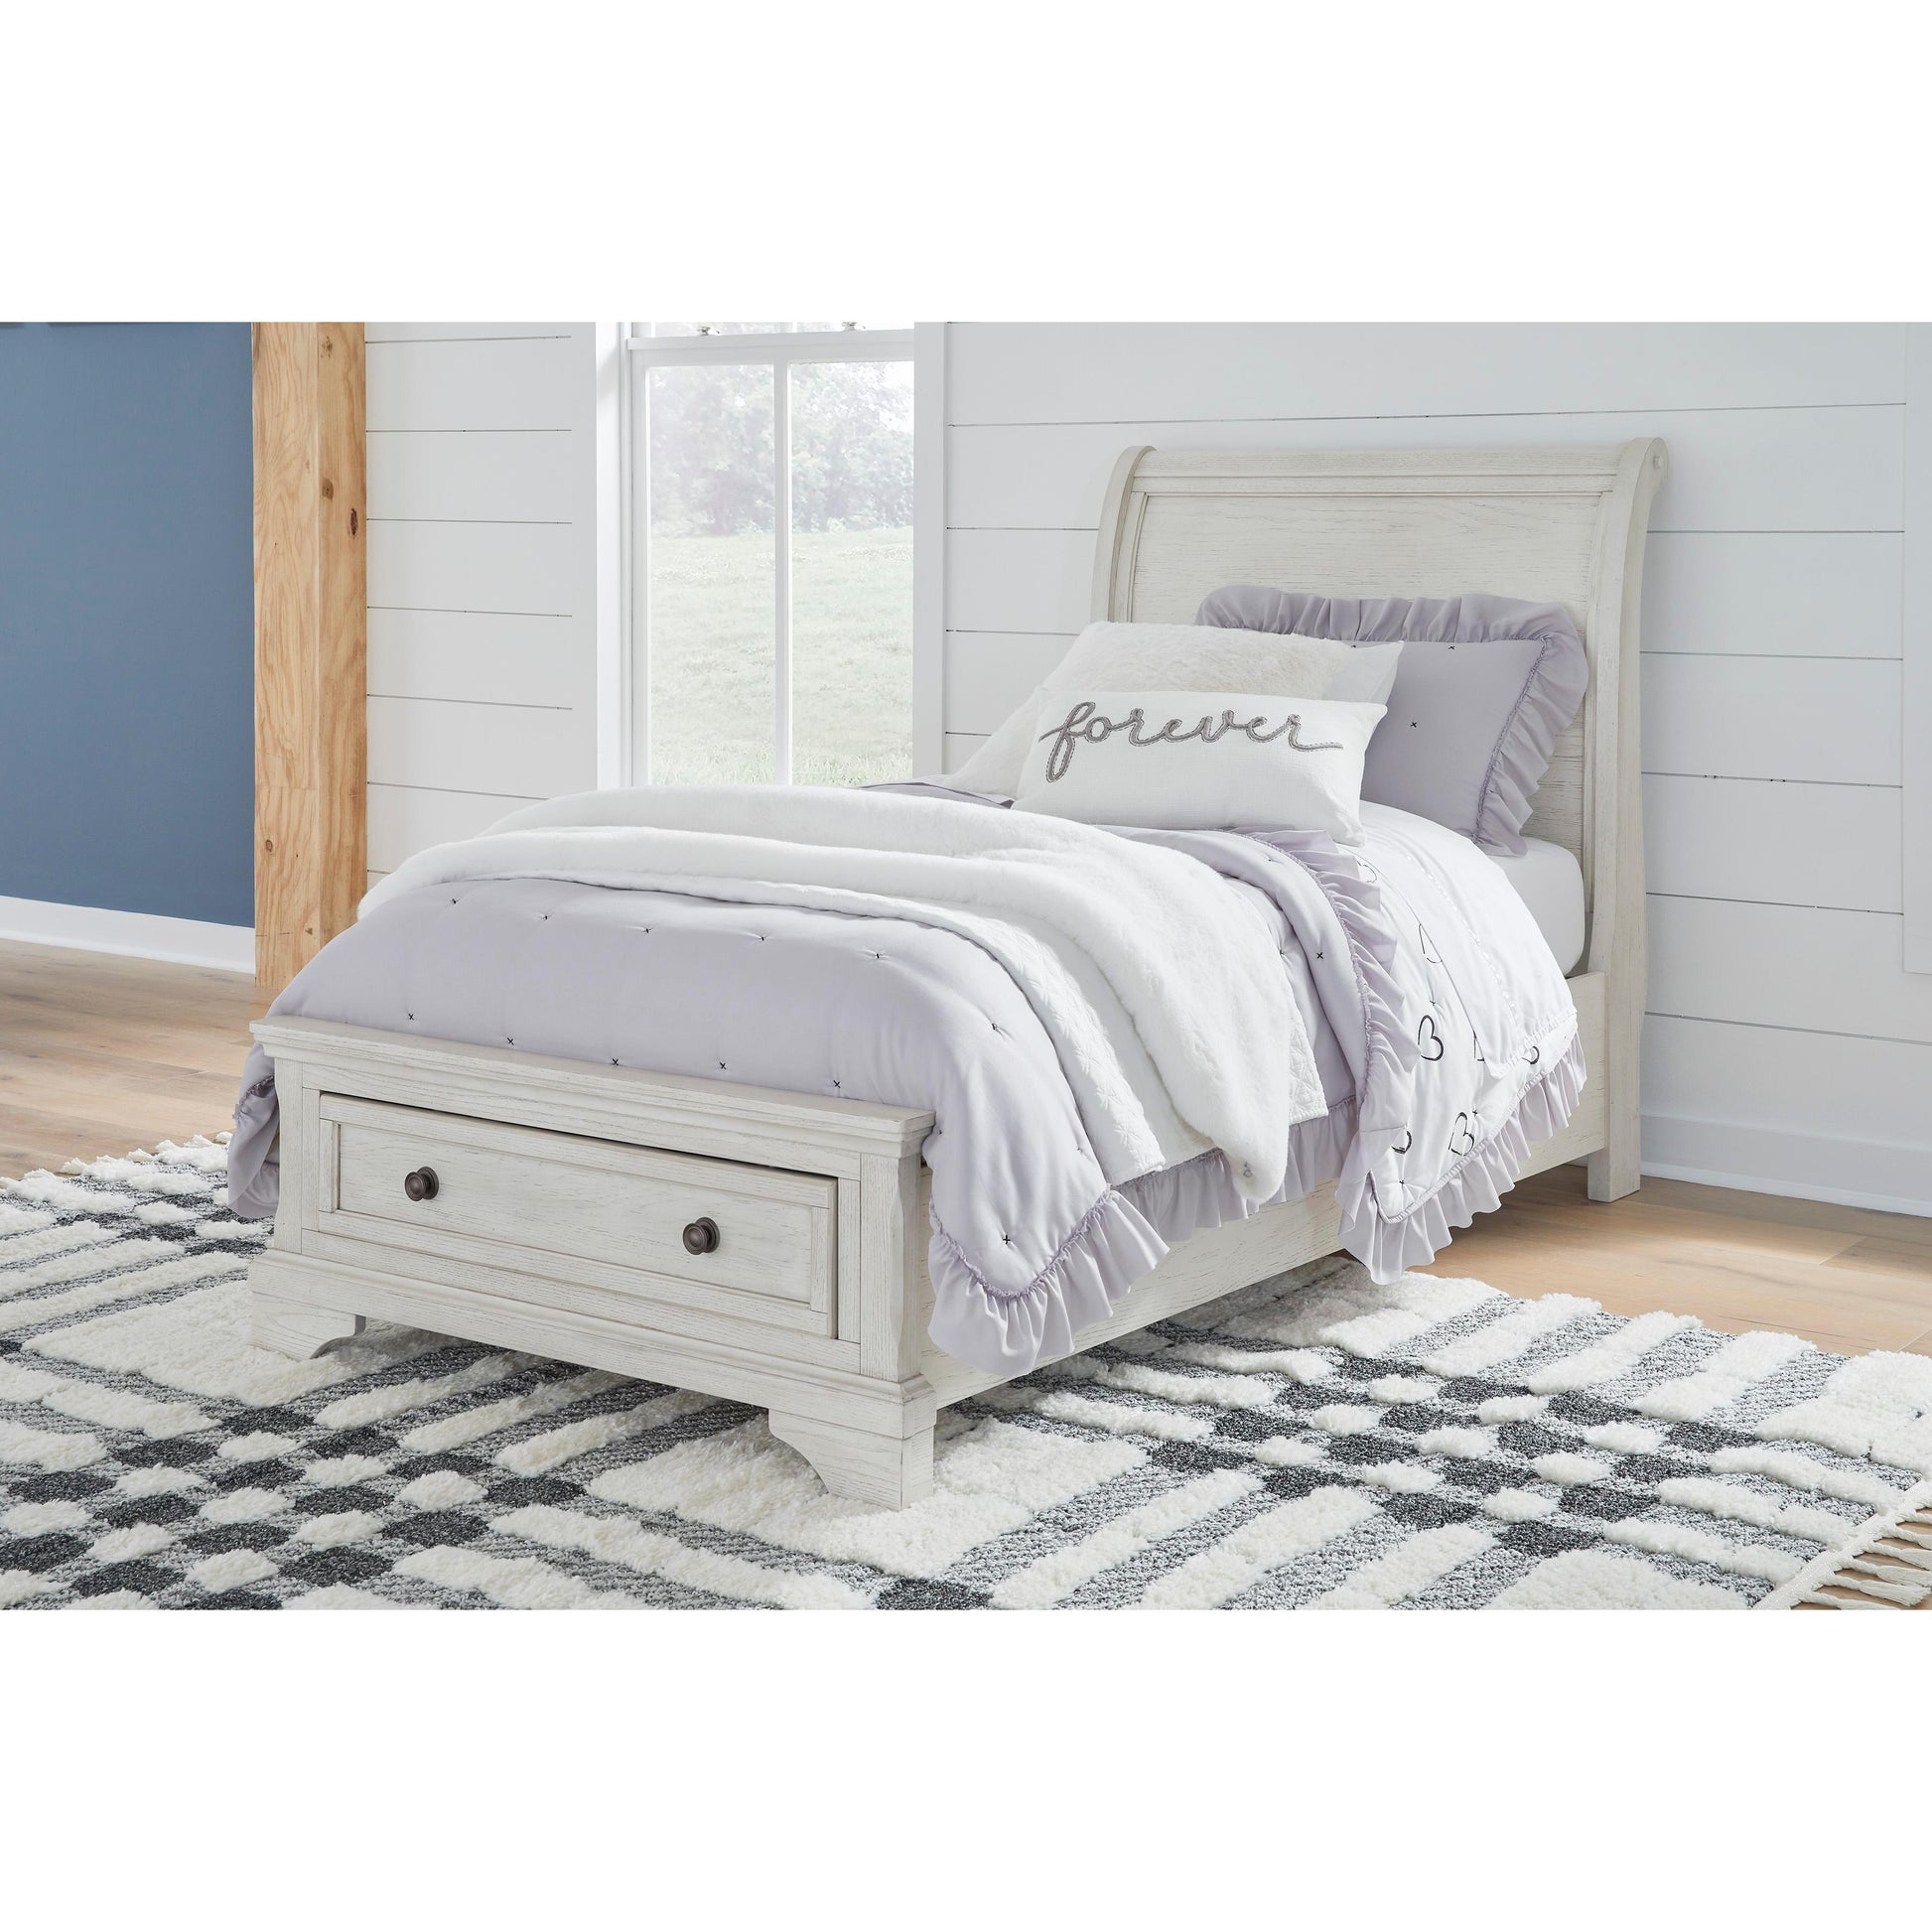 Signature Design by Ashley Kids Beds Bed B742-53/B742-52S/B742-183 IMAGE 5